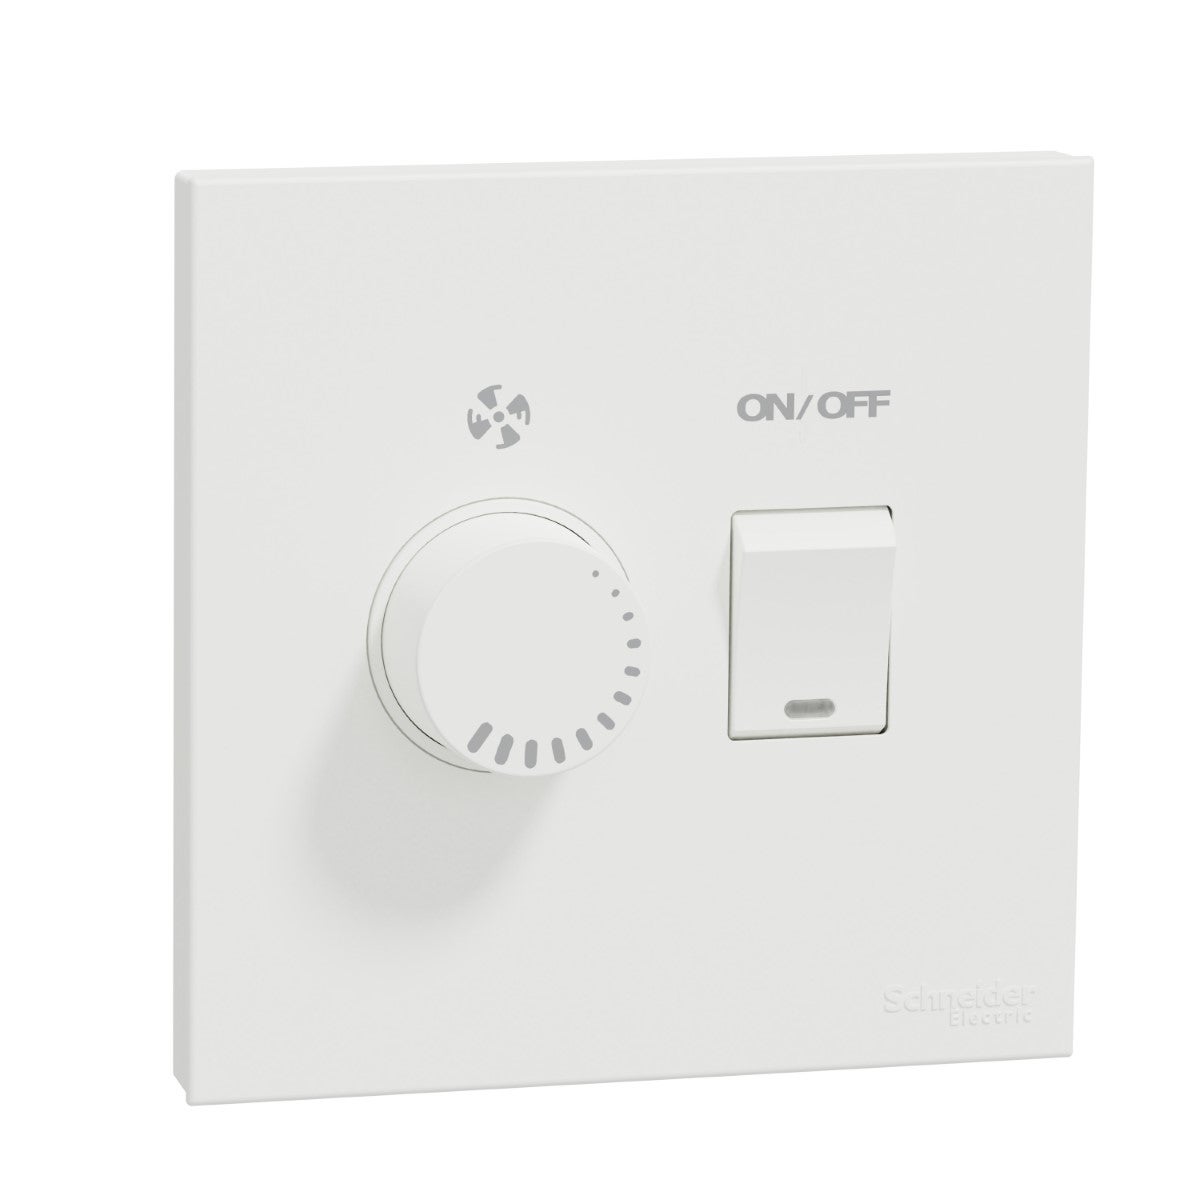 Fan Controller with switch, AvatarOn C, white